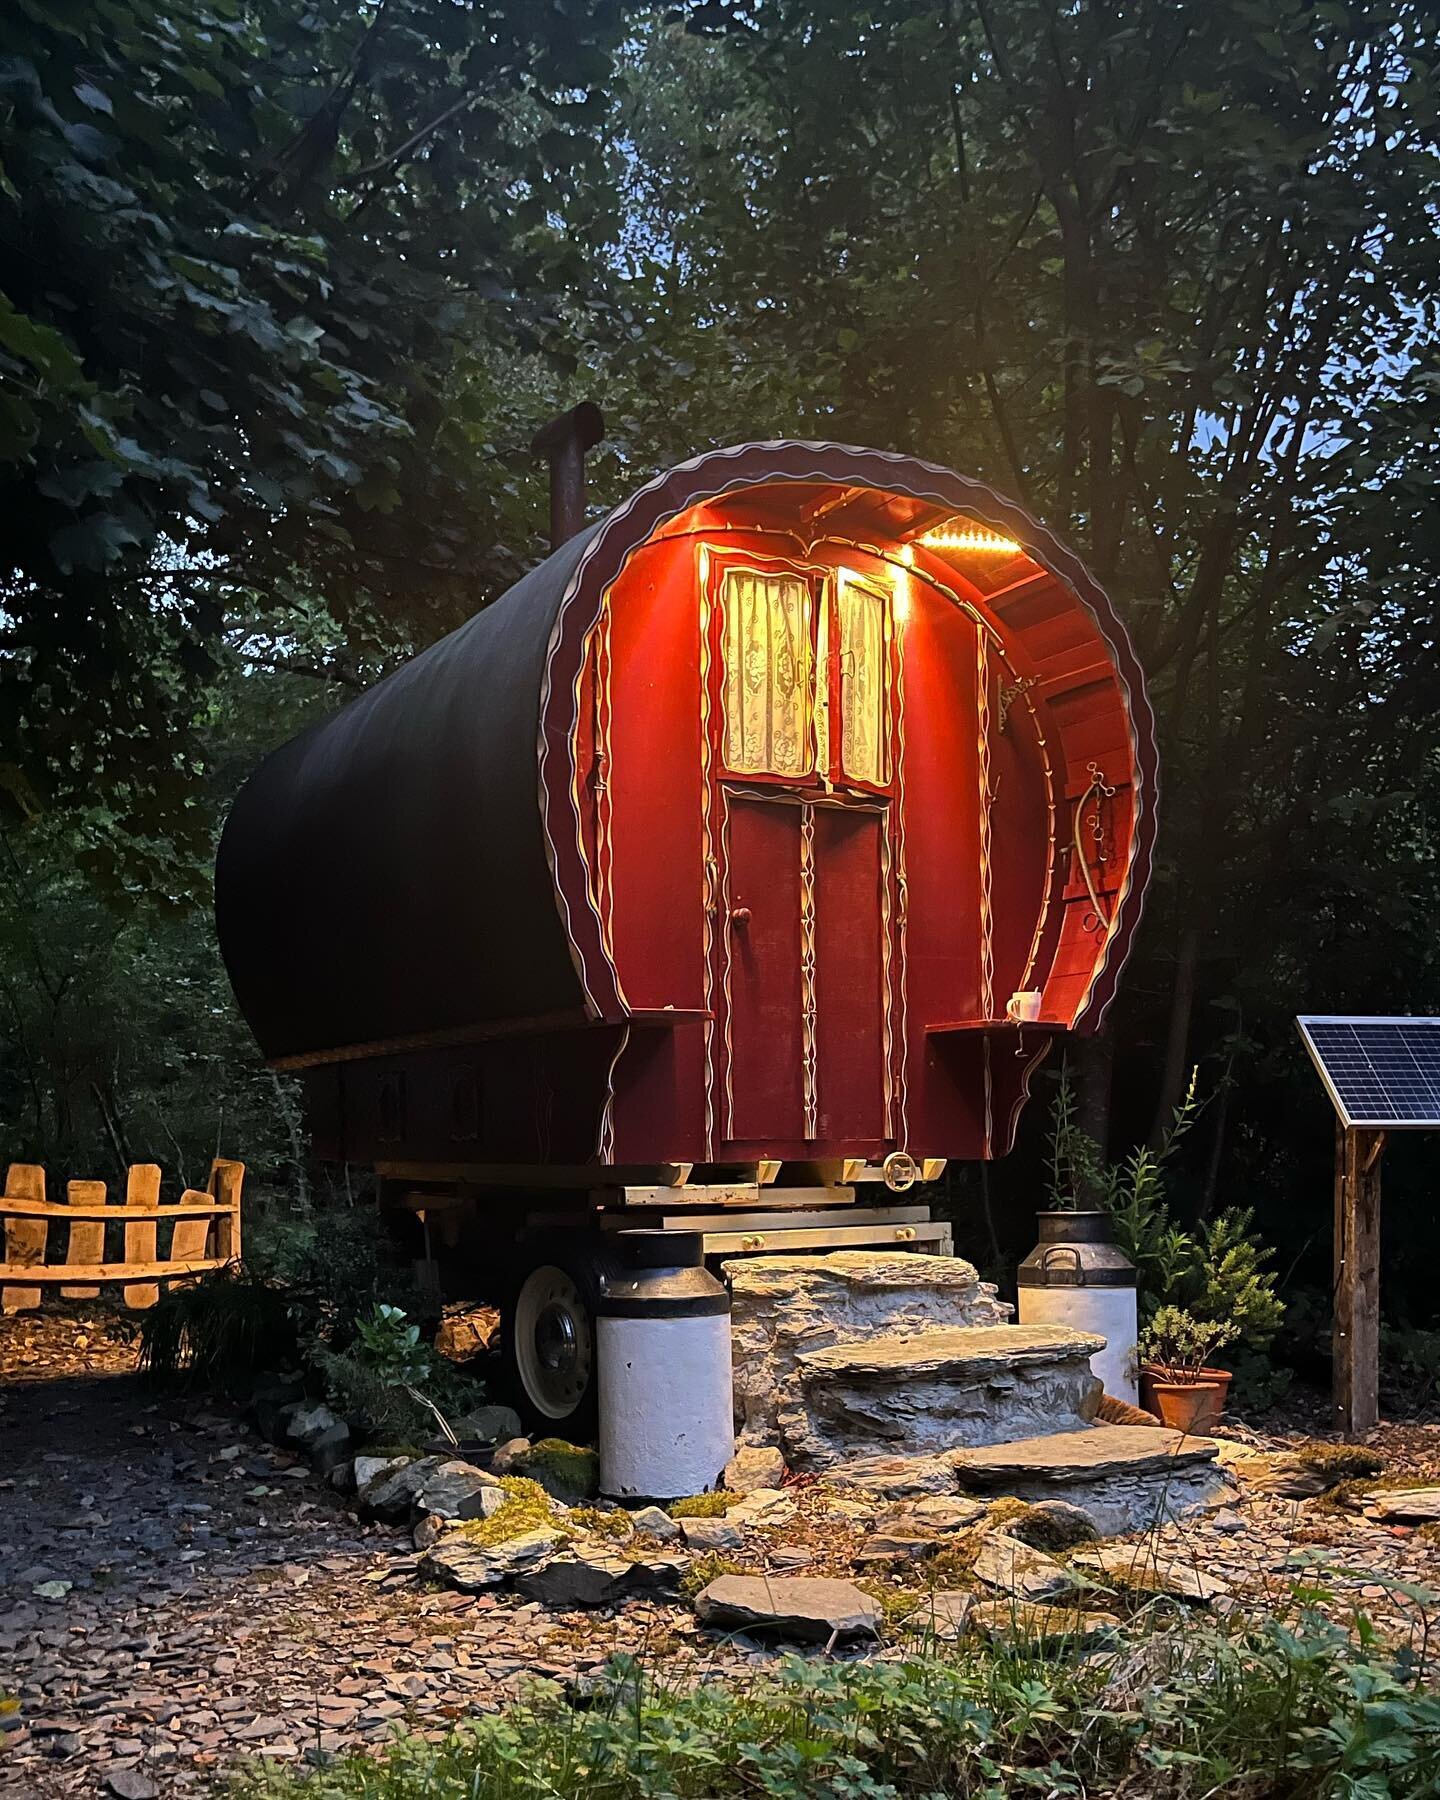 Coming this Autumn 👀 our beautiful gypsy caravan nestled away in Hazel Wood will be available to book in time for October Half Term 🪵

Featuring an authentically restored interior complete with log burning stove, solar powered electricity, a separa